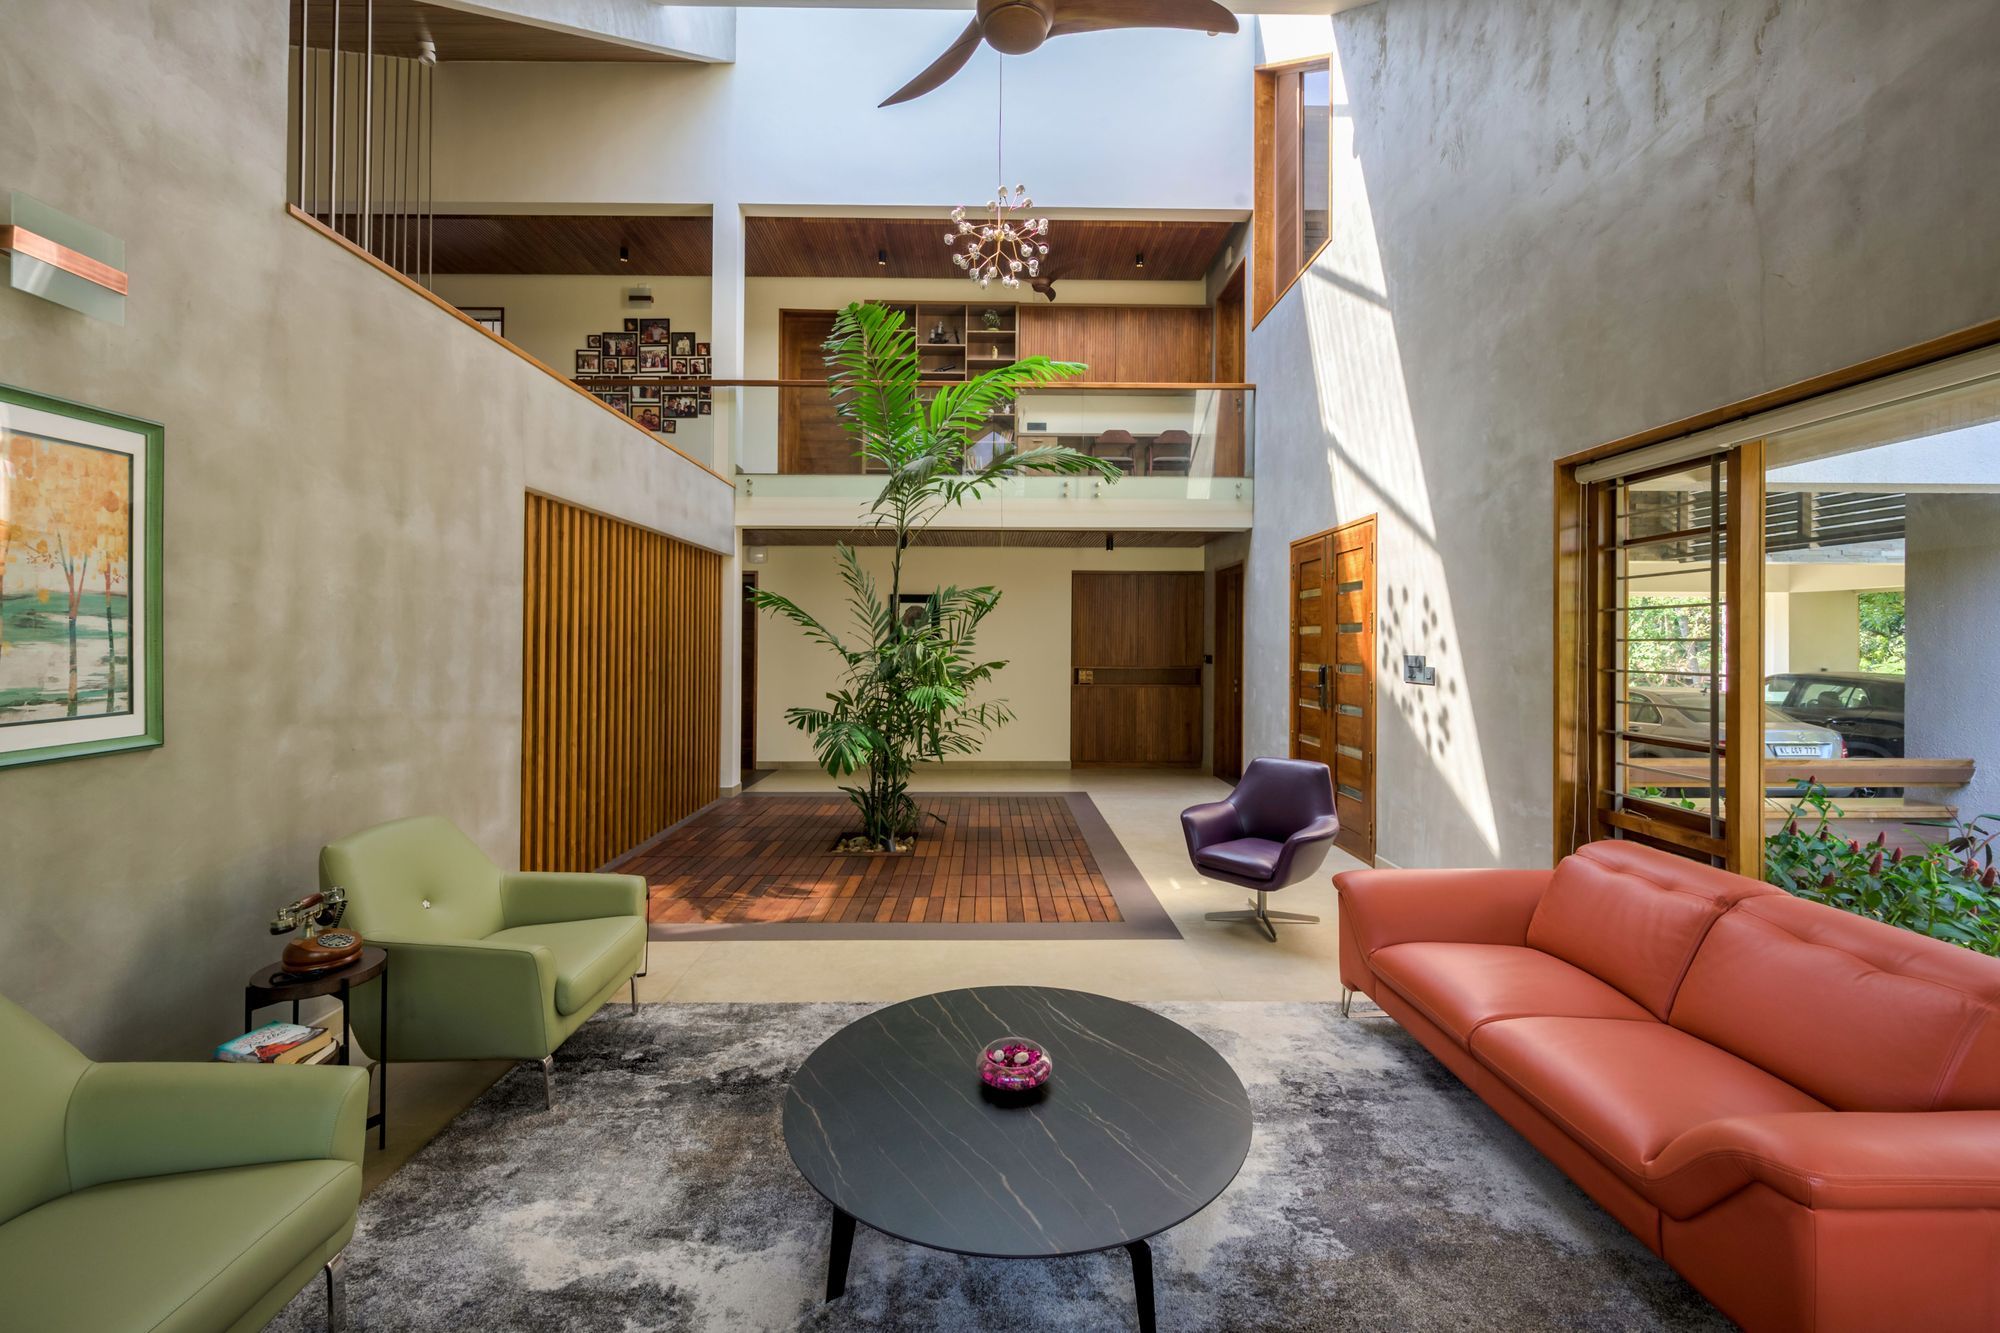 Minimalism Meets Nature in Perfect Harmony In This Kerela House On A 7,500 sq ft Plot